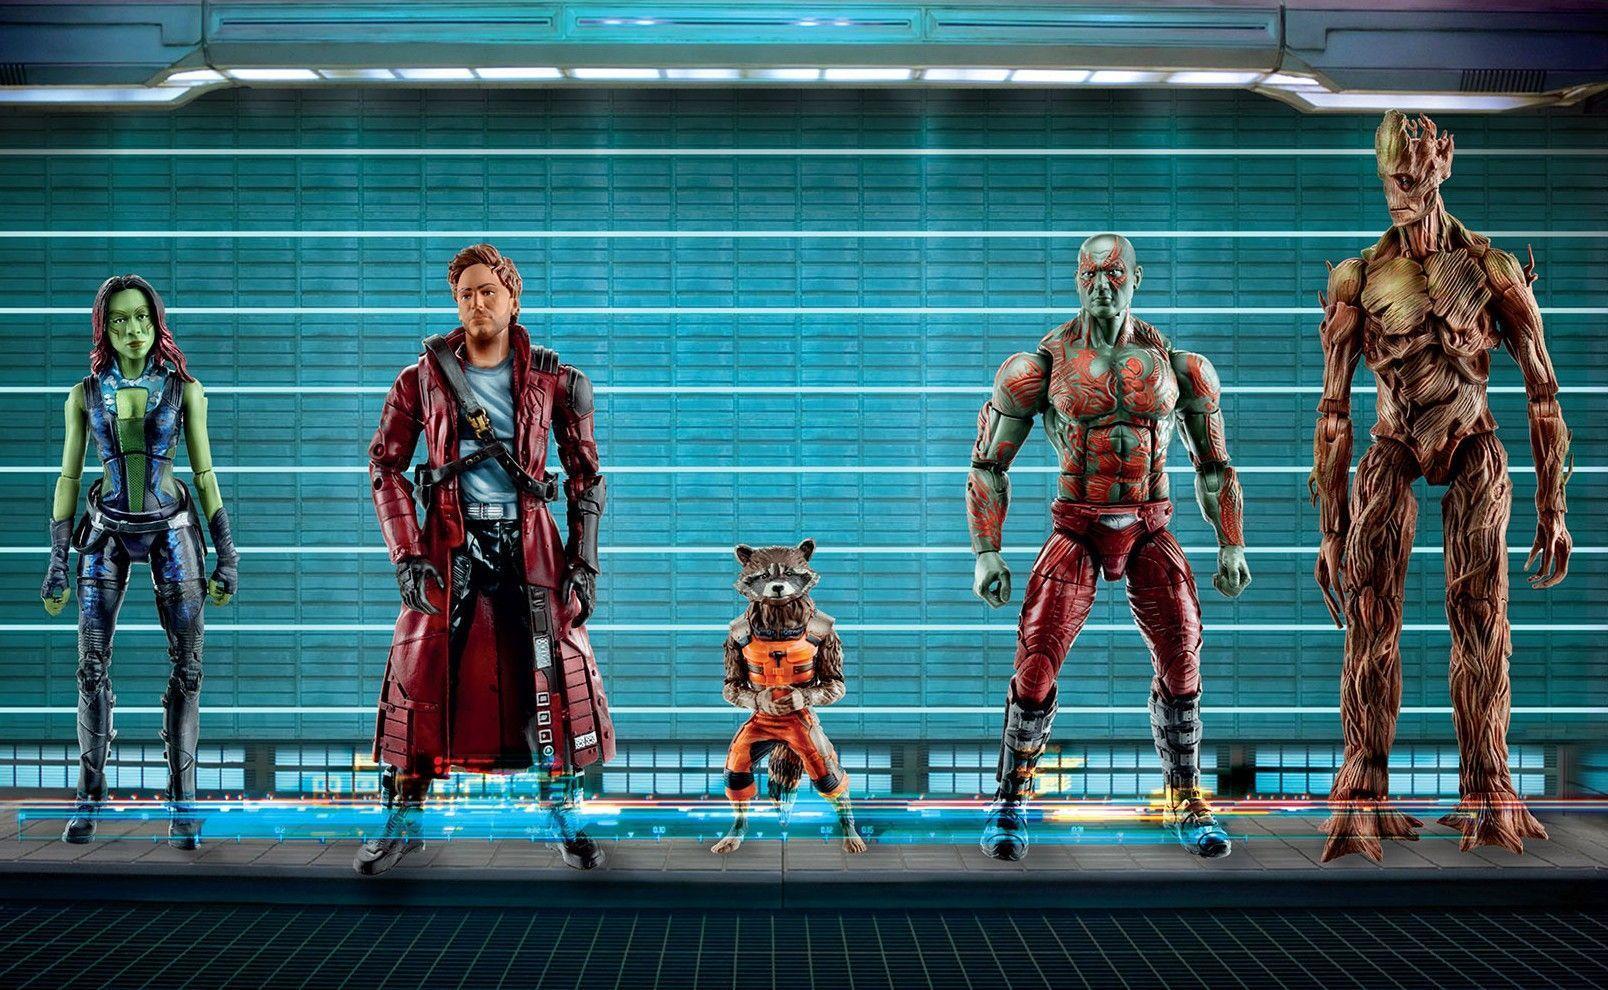 Guardians Of The Galaxy Wallpaper, HD Image Guardians Of